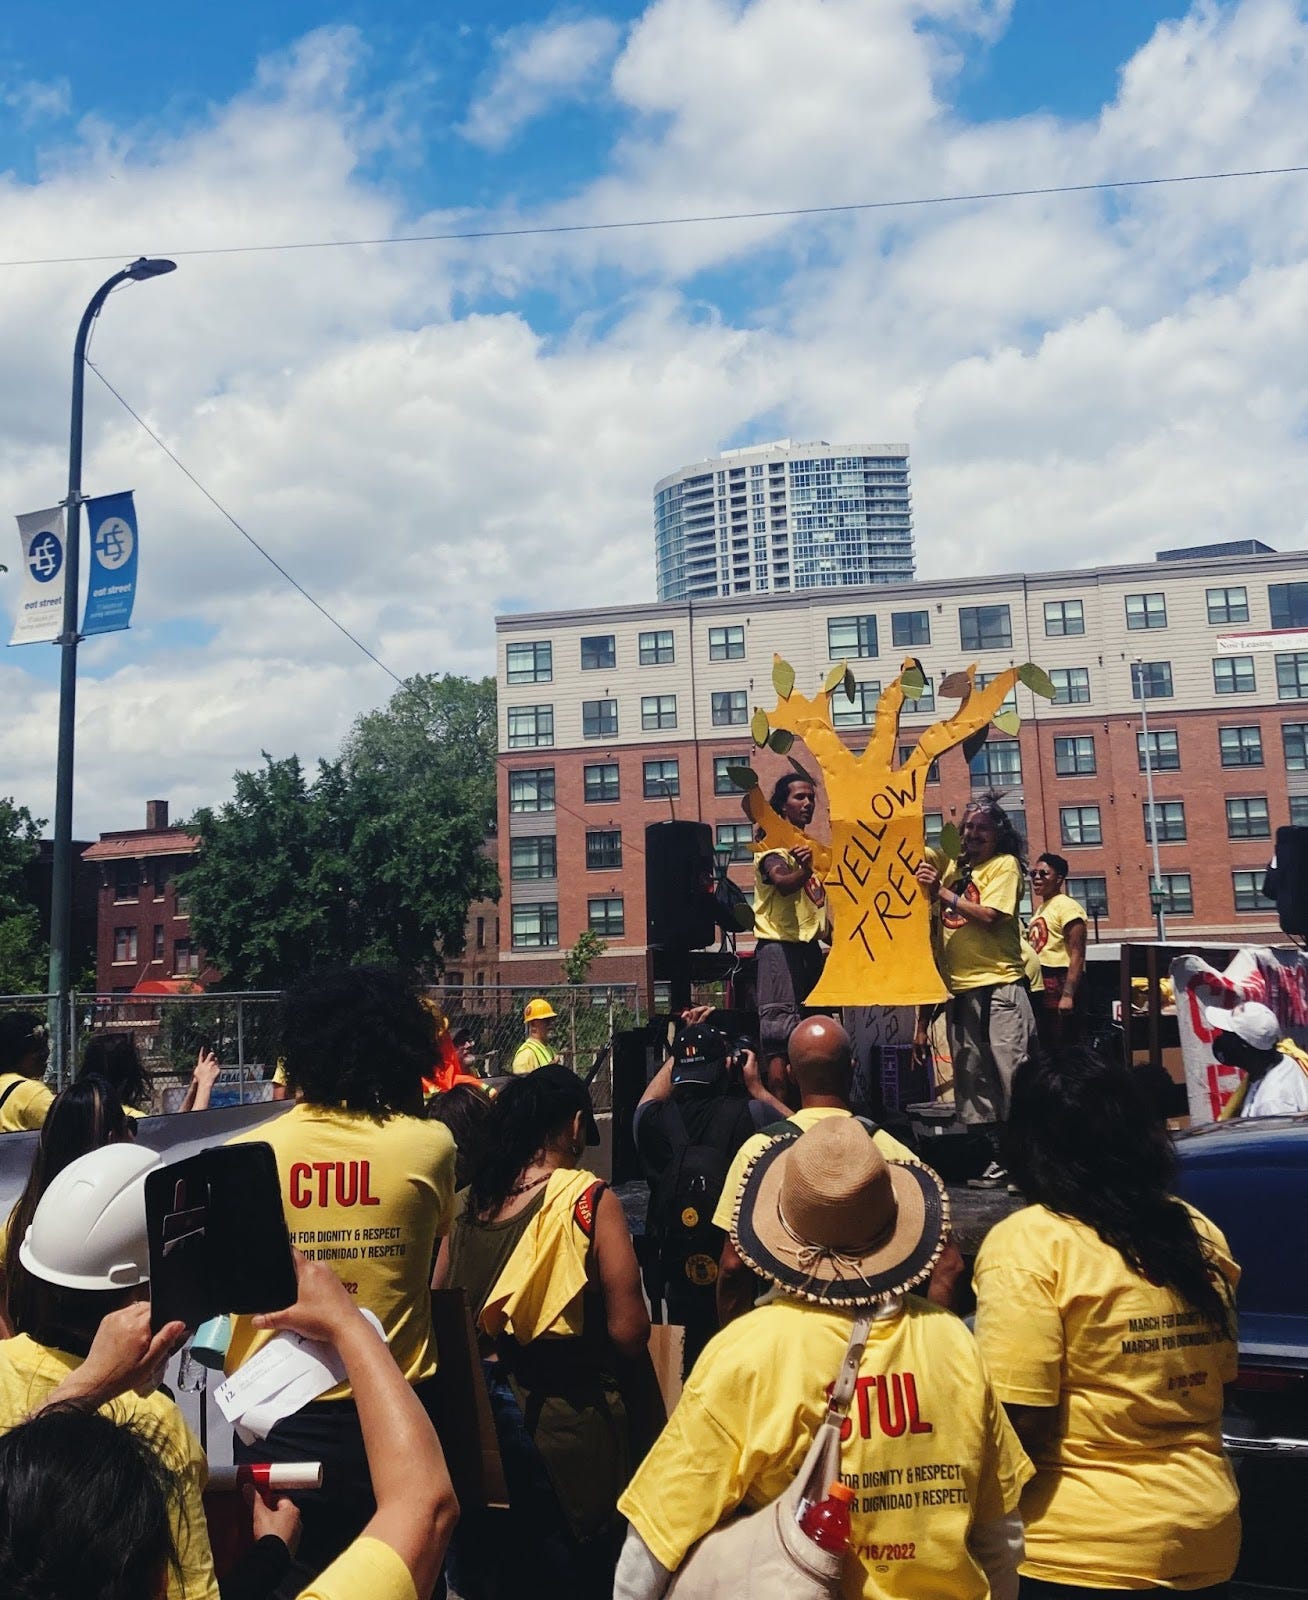 a crowd of people in yellow shirts stands behind a group of people standing on a truck holding a yellow cardboard tree with the words "yellow tree" on it